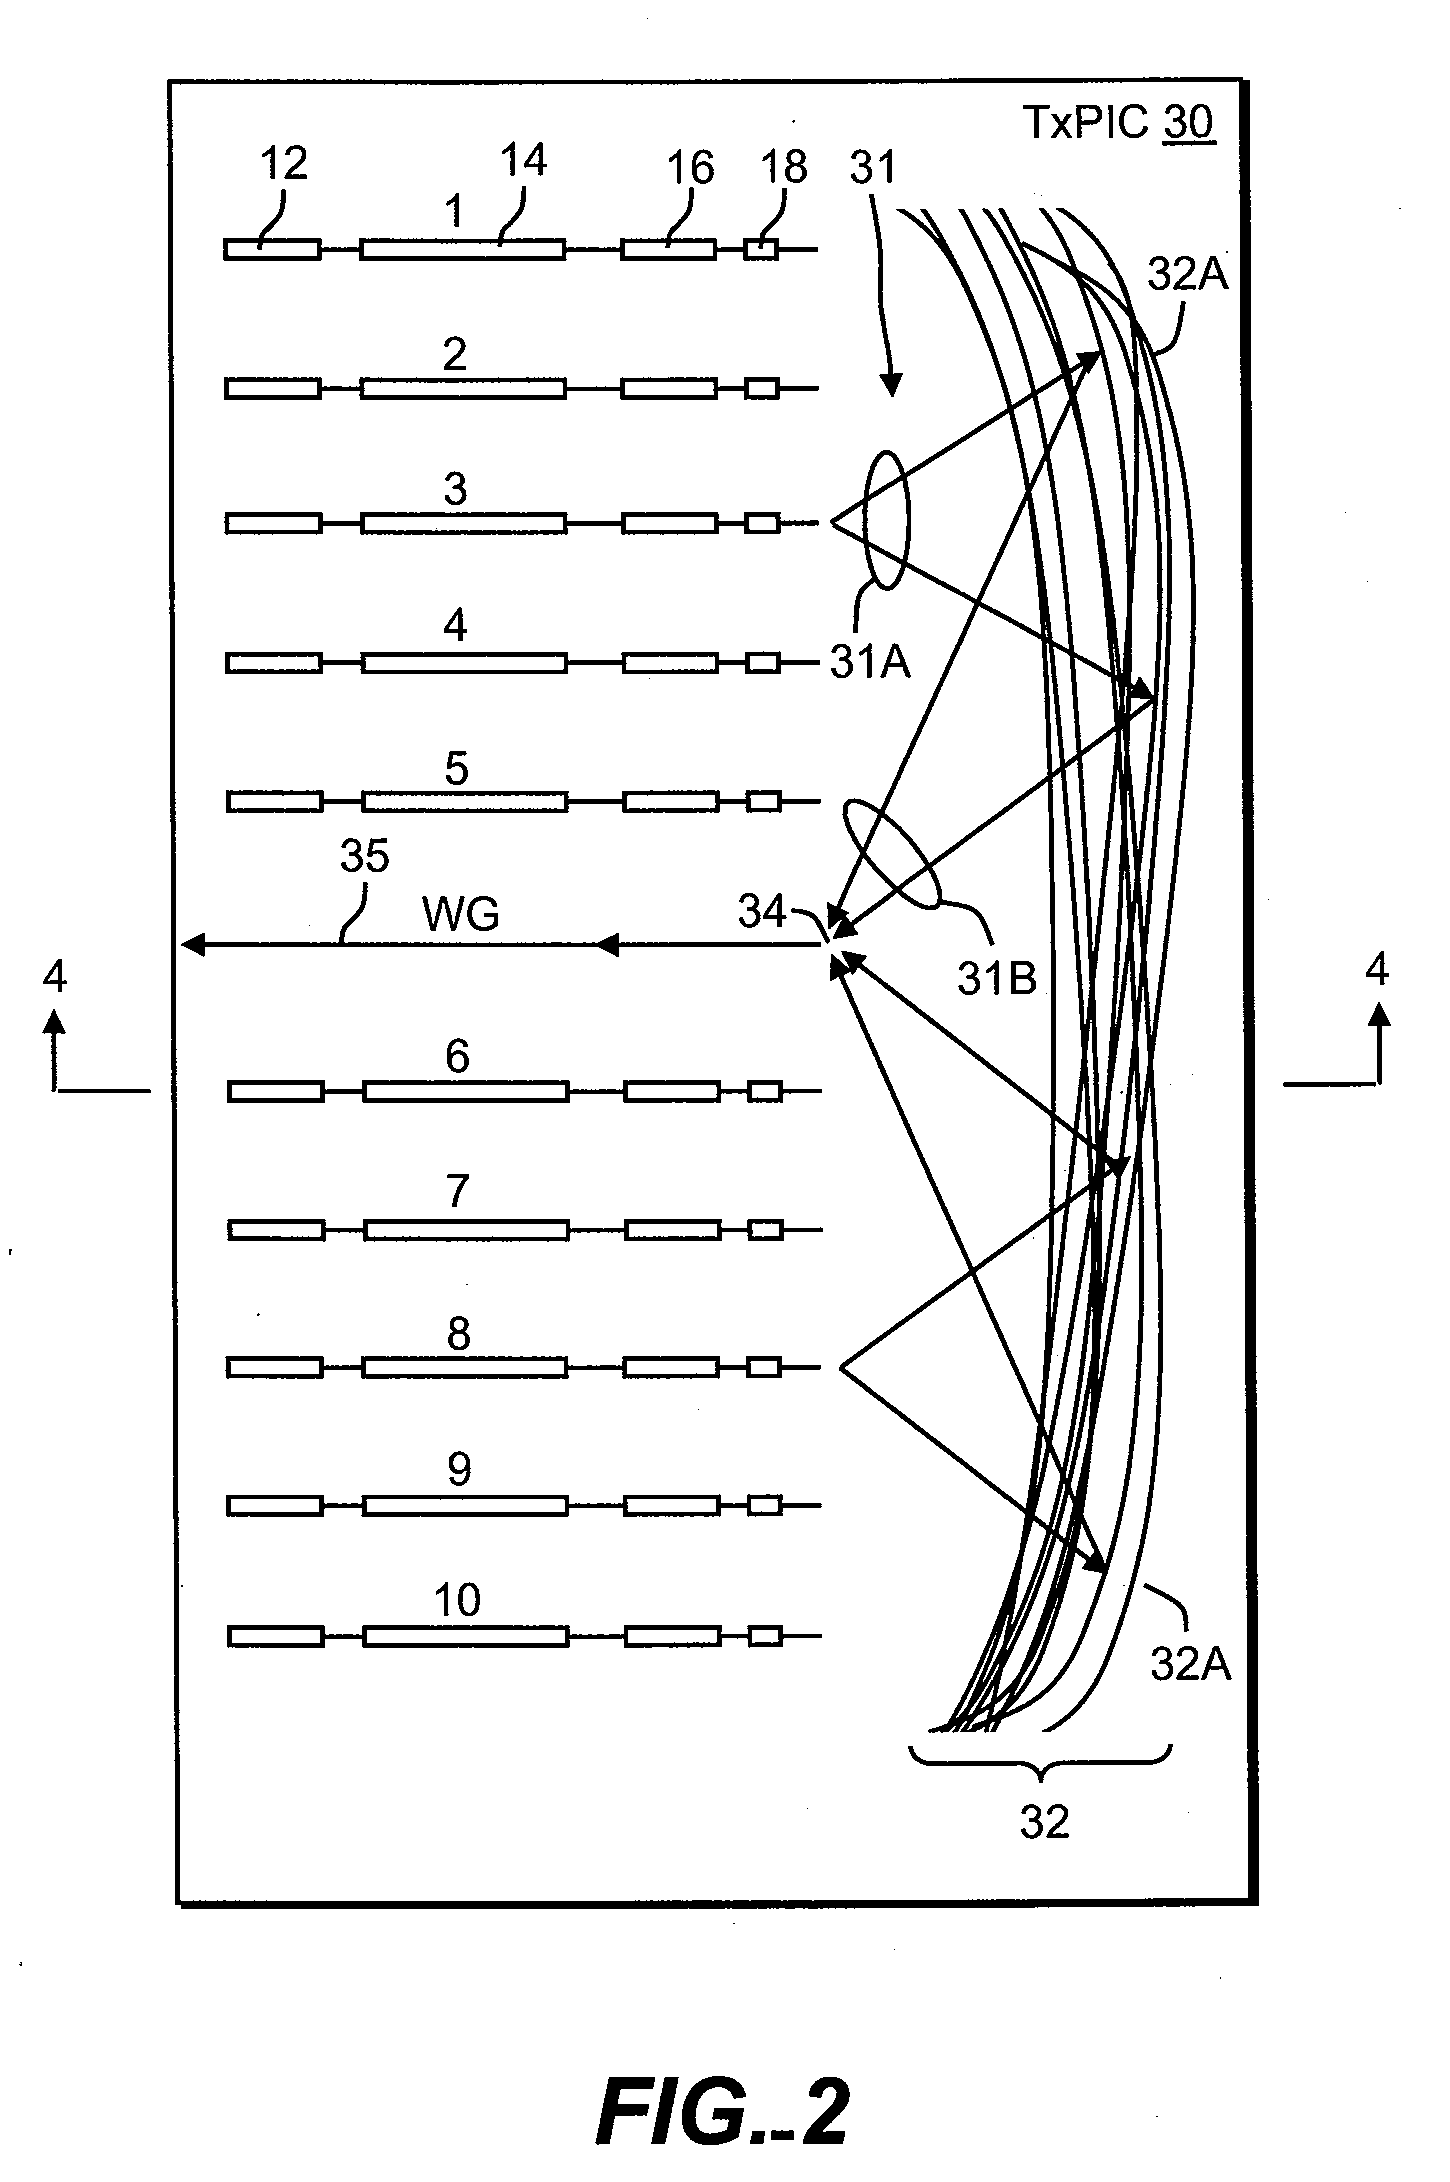 Receiver photonic integrated circuit (RXPIC) chip utilizing compact wavelength selective decombiners